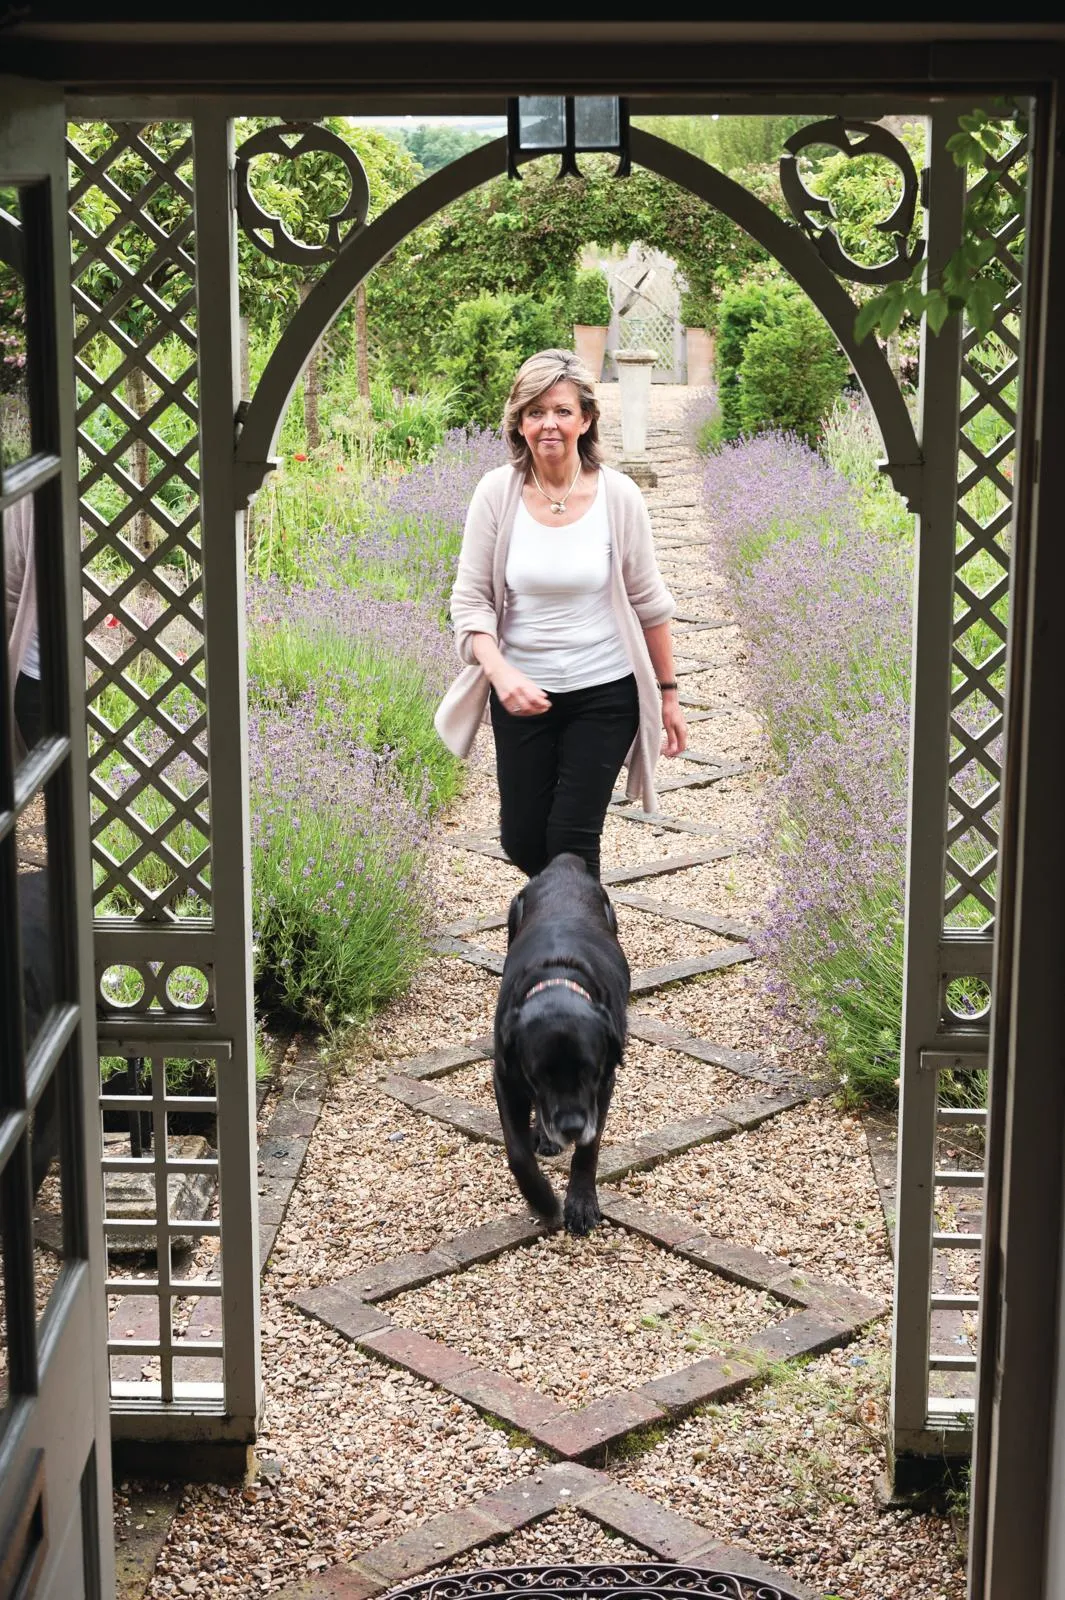 English country home owner Kate